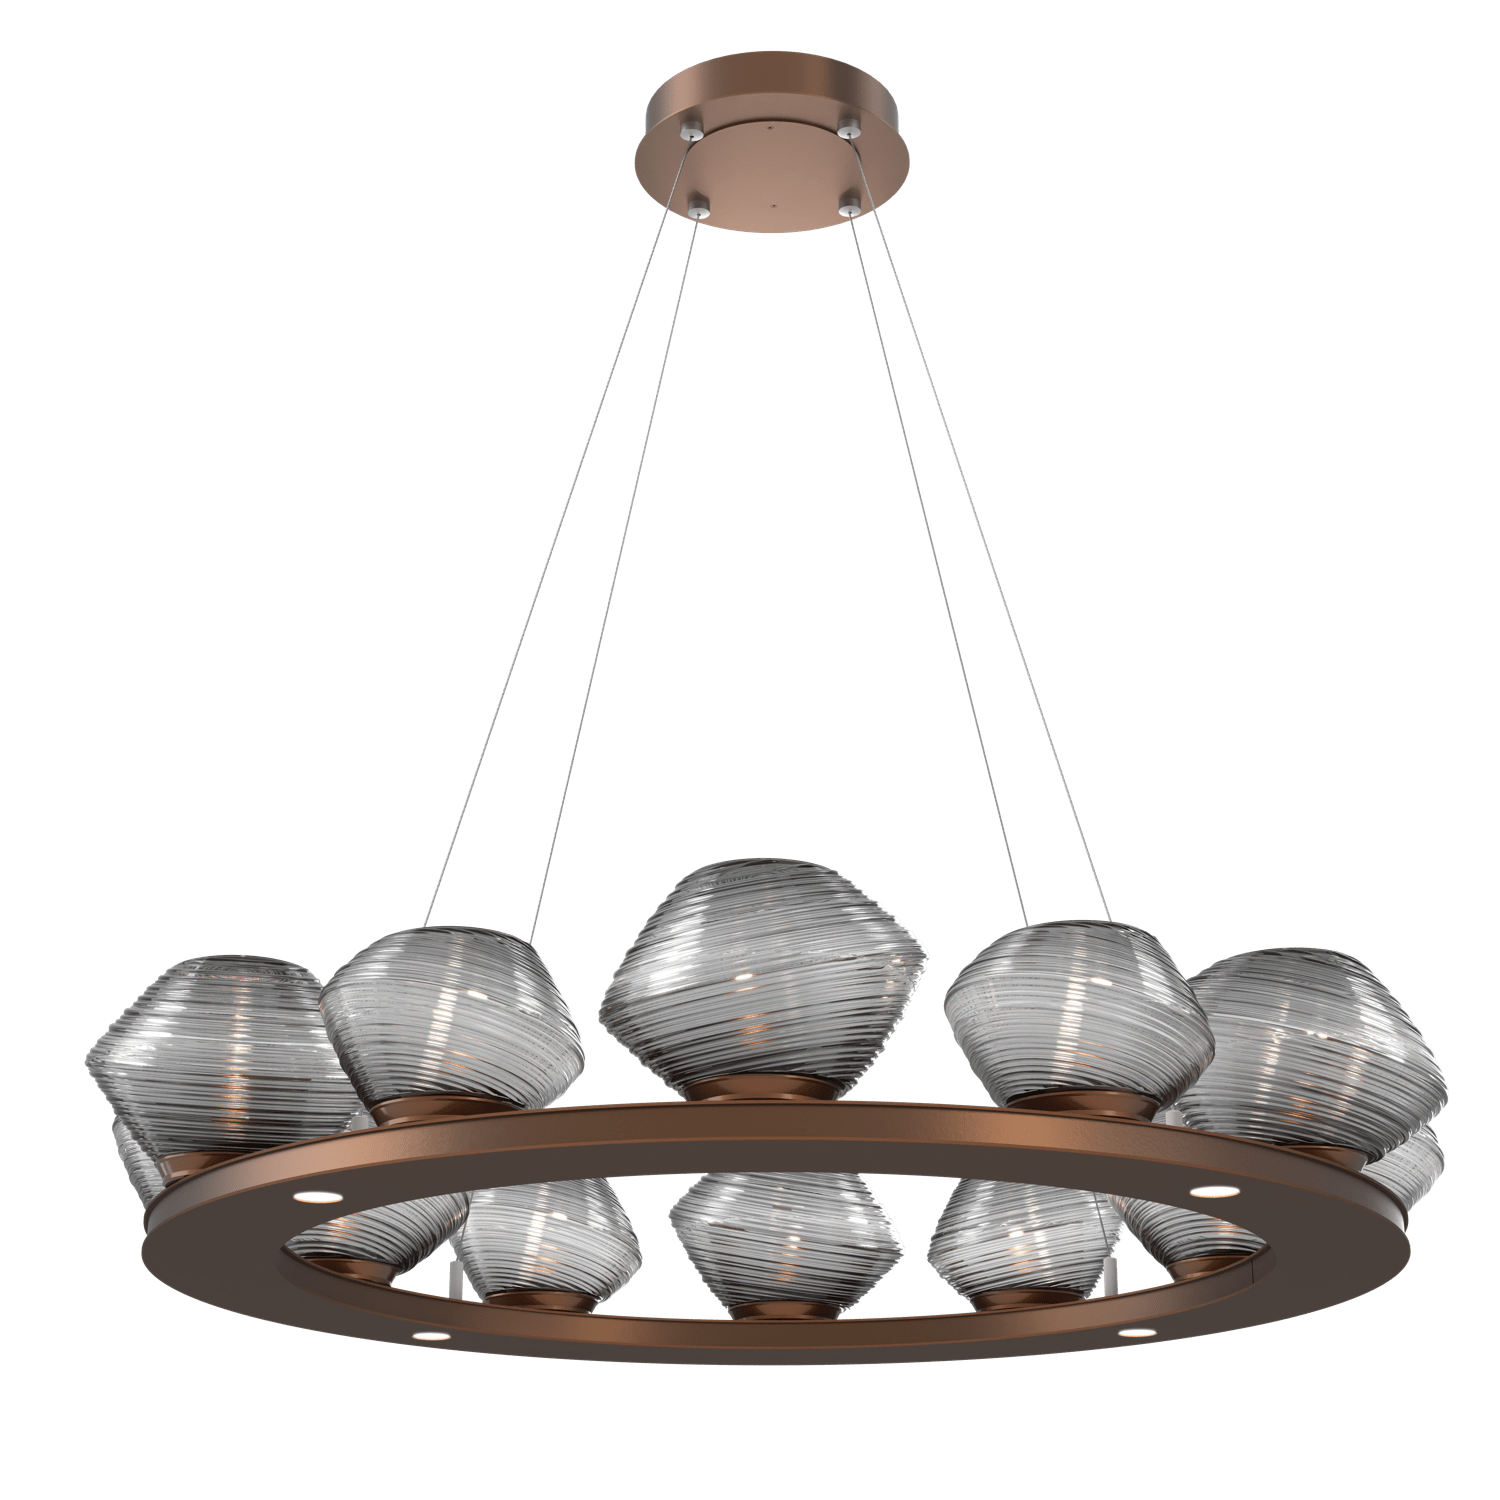 CHB0089-0C-BB-S-Hammerton-Studio-Mesa-36-inch-ring-chandelier-with-burnished-bronze-finish-and-smoke-blown-glass-shades-and-LED-lamping